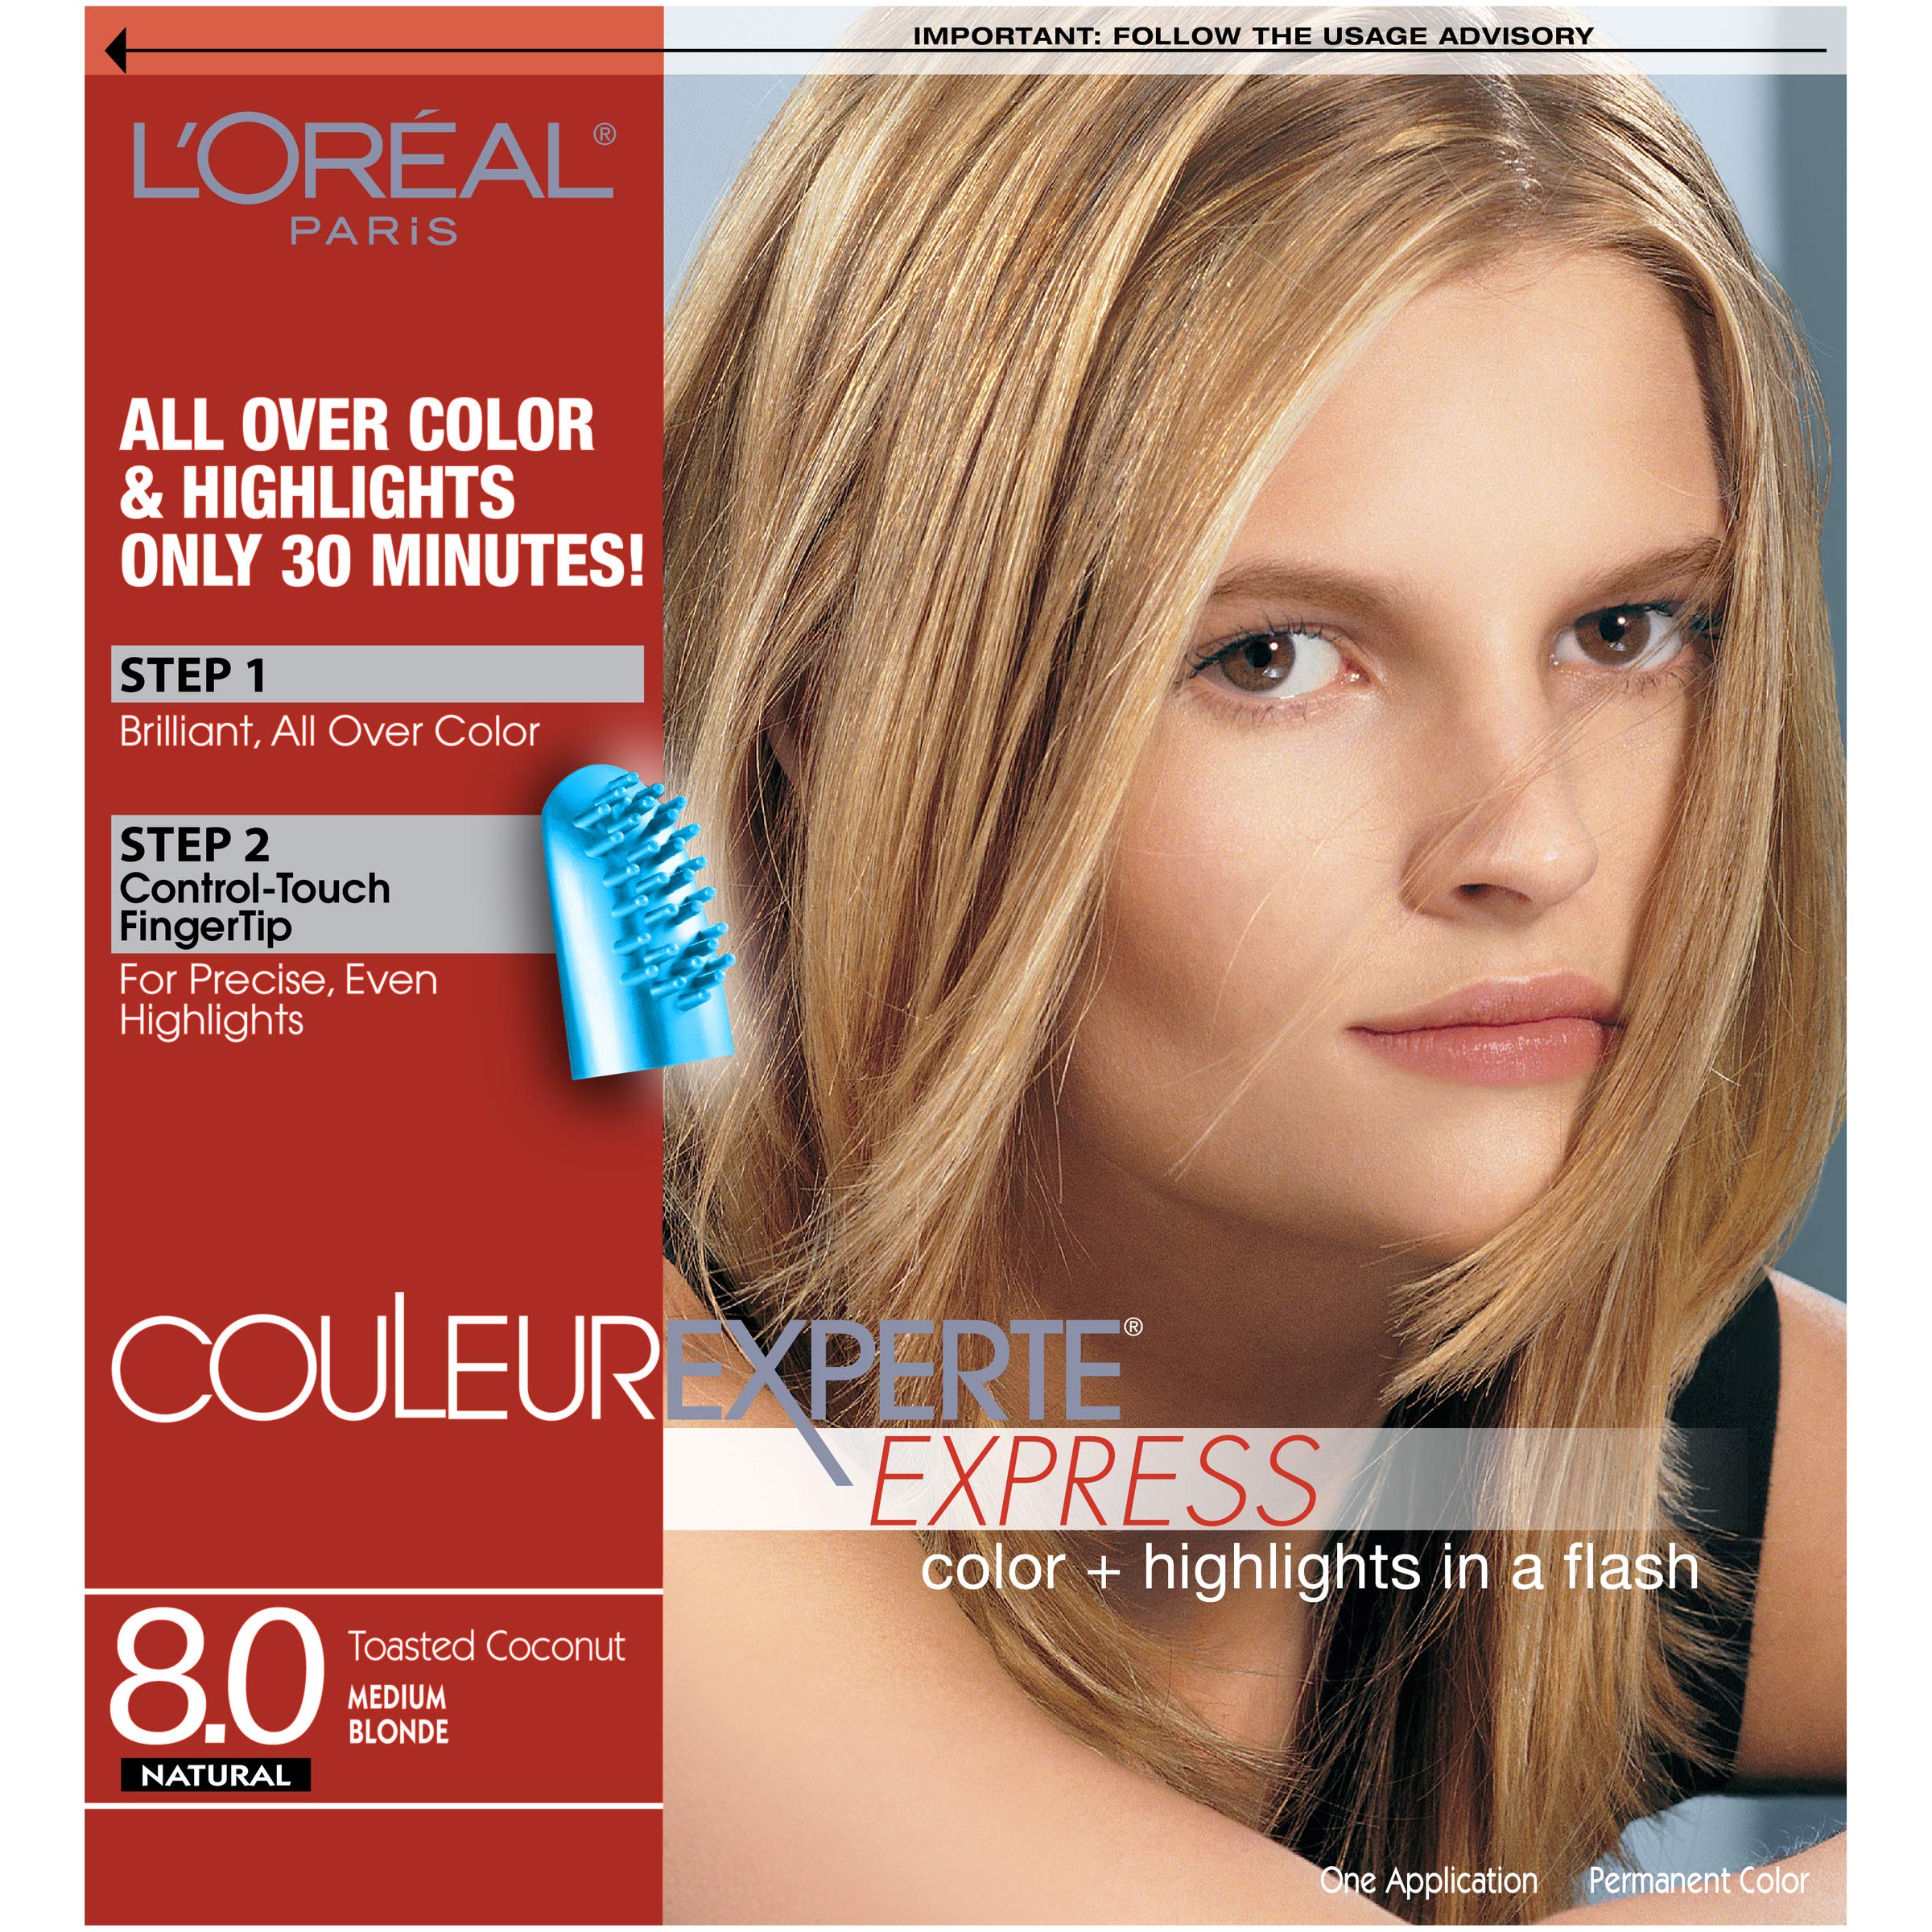 L'Oreal Paris Couleur Experte 2-Step Home Hair Color and Highlights Kit,  Toasted Coconut 8 Medium Blonde/Toasted Coconut 1 Count (Pack of 1)